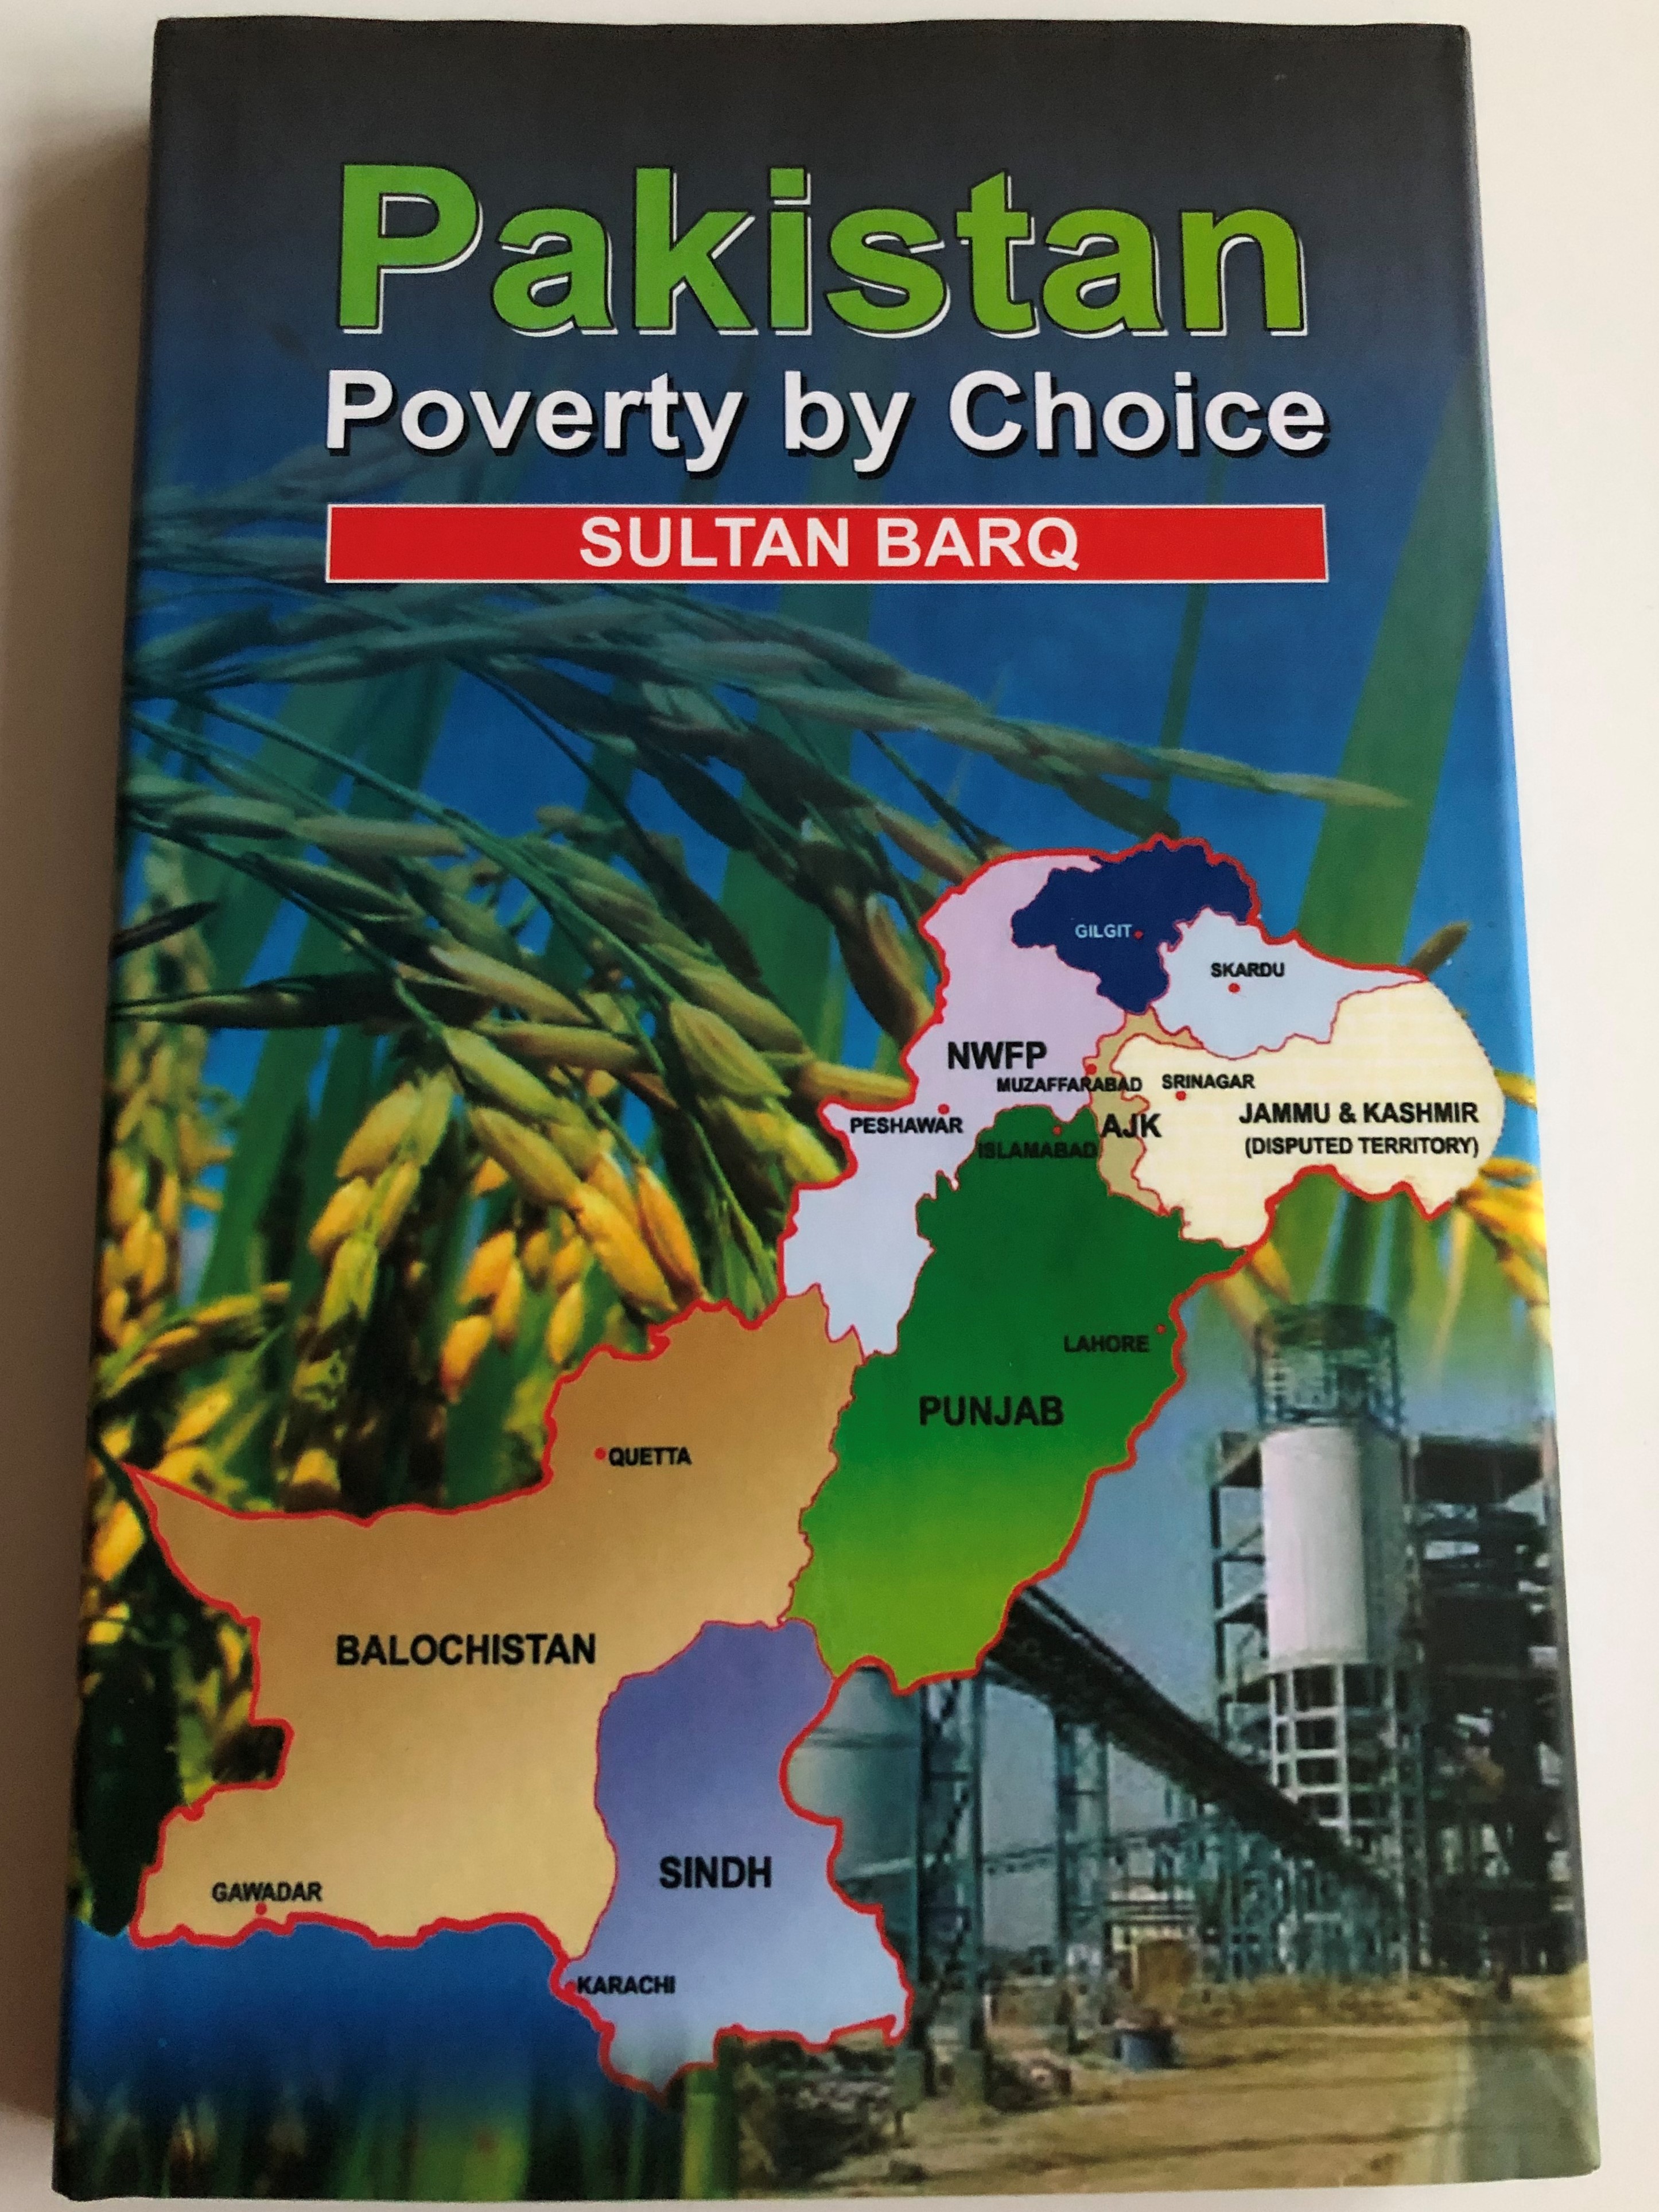 pakistan-poverty-by-choice-by-sultan-barq-hardcover-mavra-publishers-2018-1-.jpg